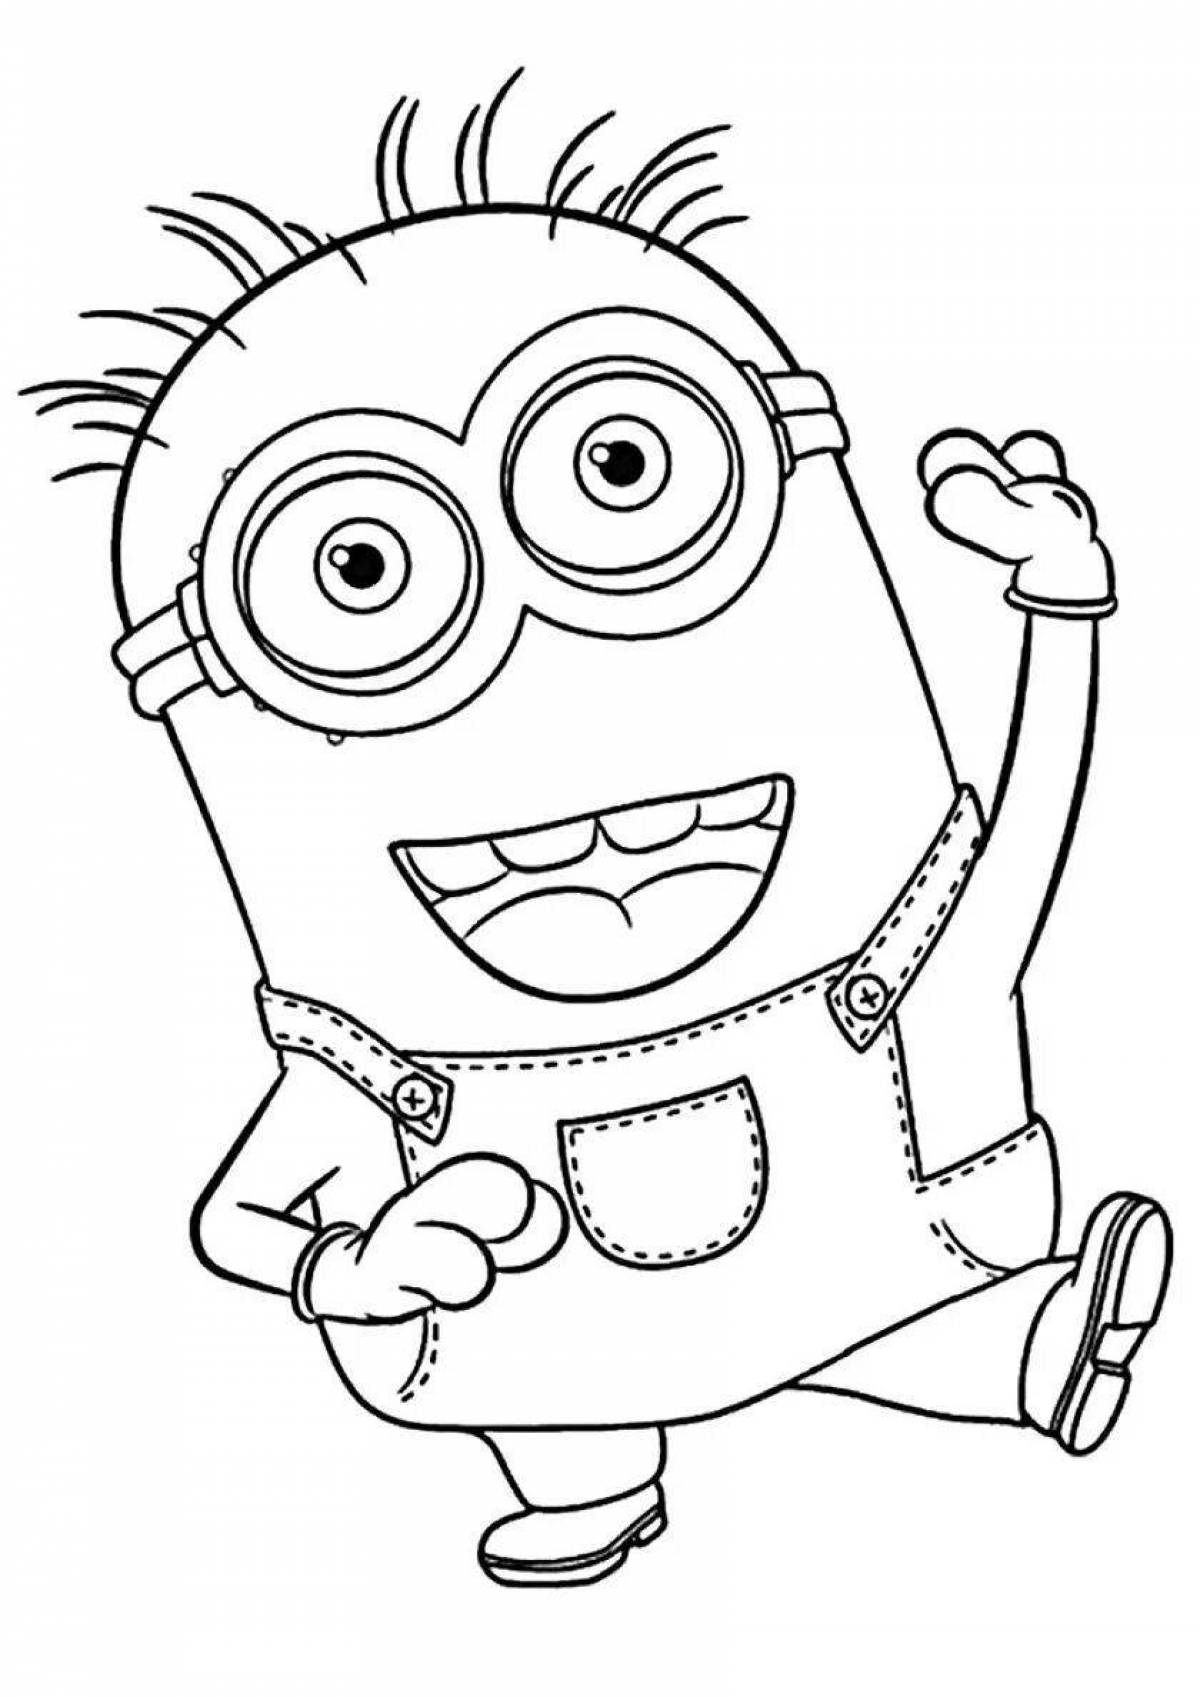 Crazy Minion Christmas Coloring Page